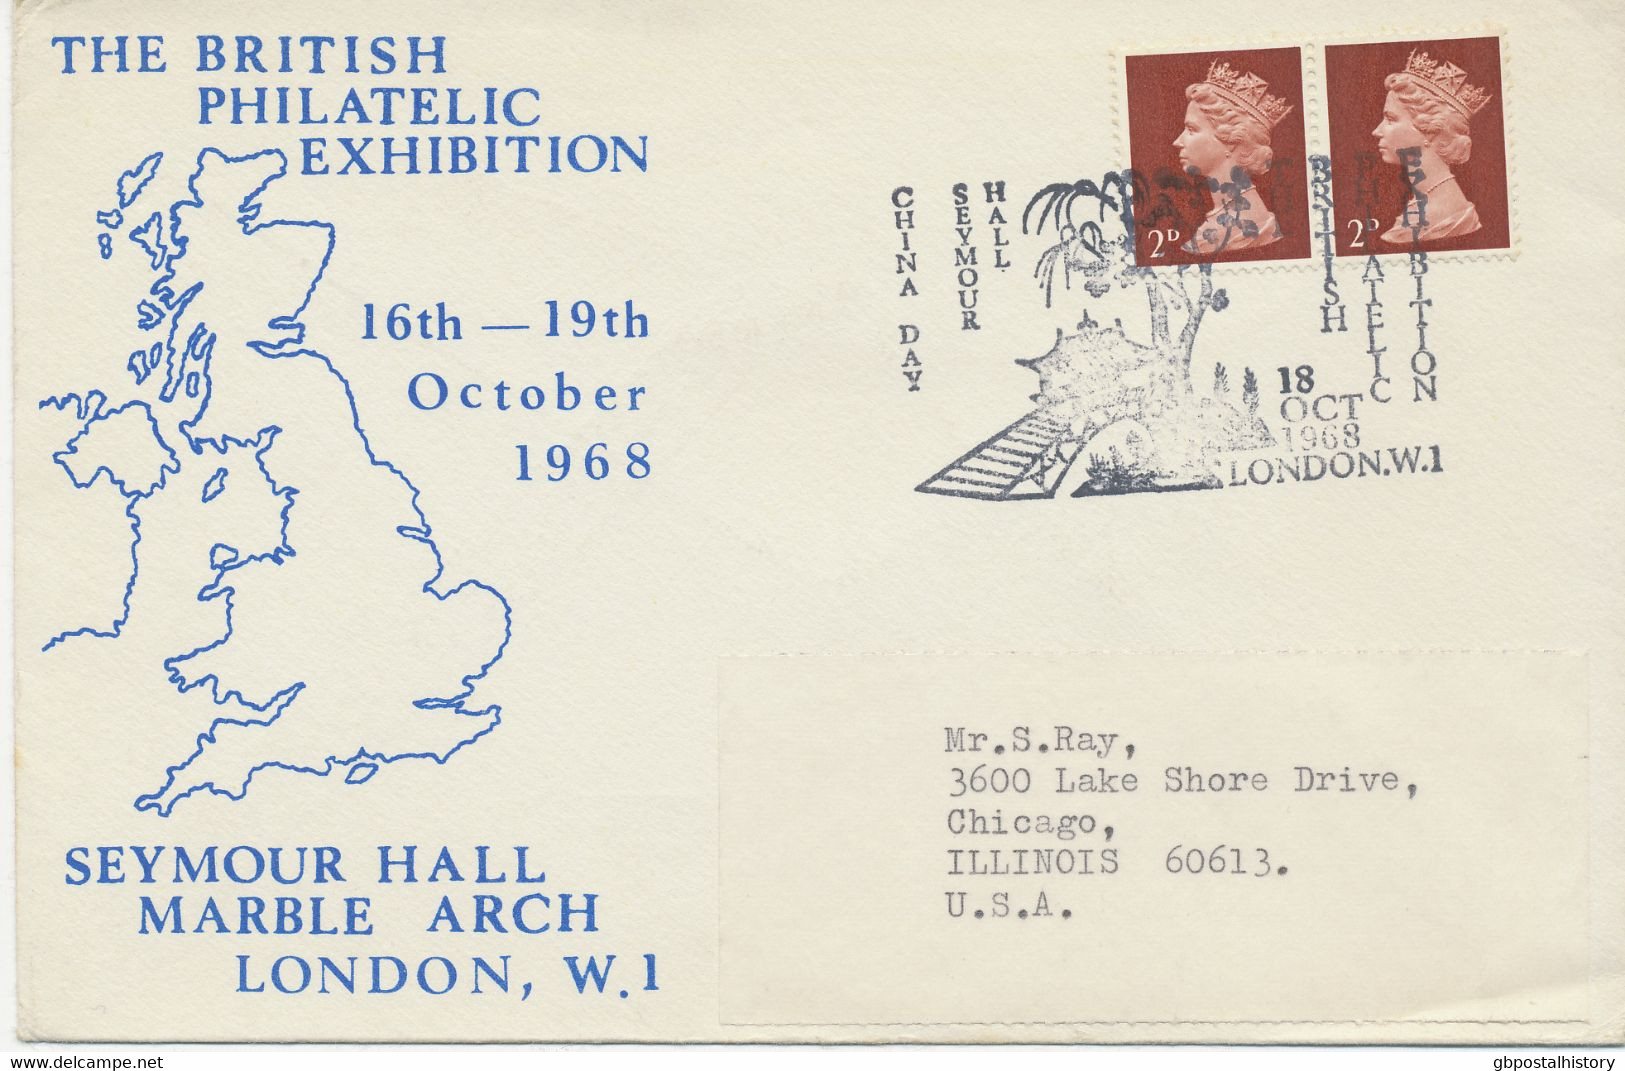 GB SPECIAL EVENT POSTMARKS PHILATELY 1968 The British Philatelic Exhibition Seymour Hall London W.I. - China Day To USA - Cartas & Documentos